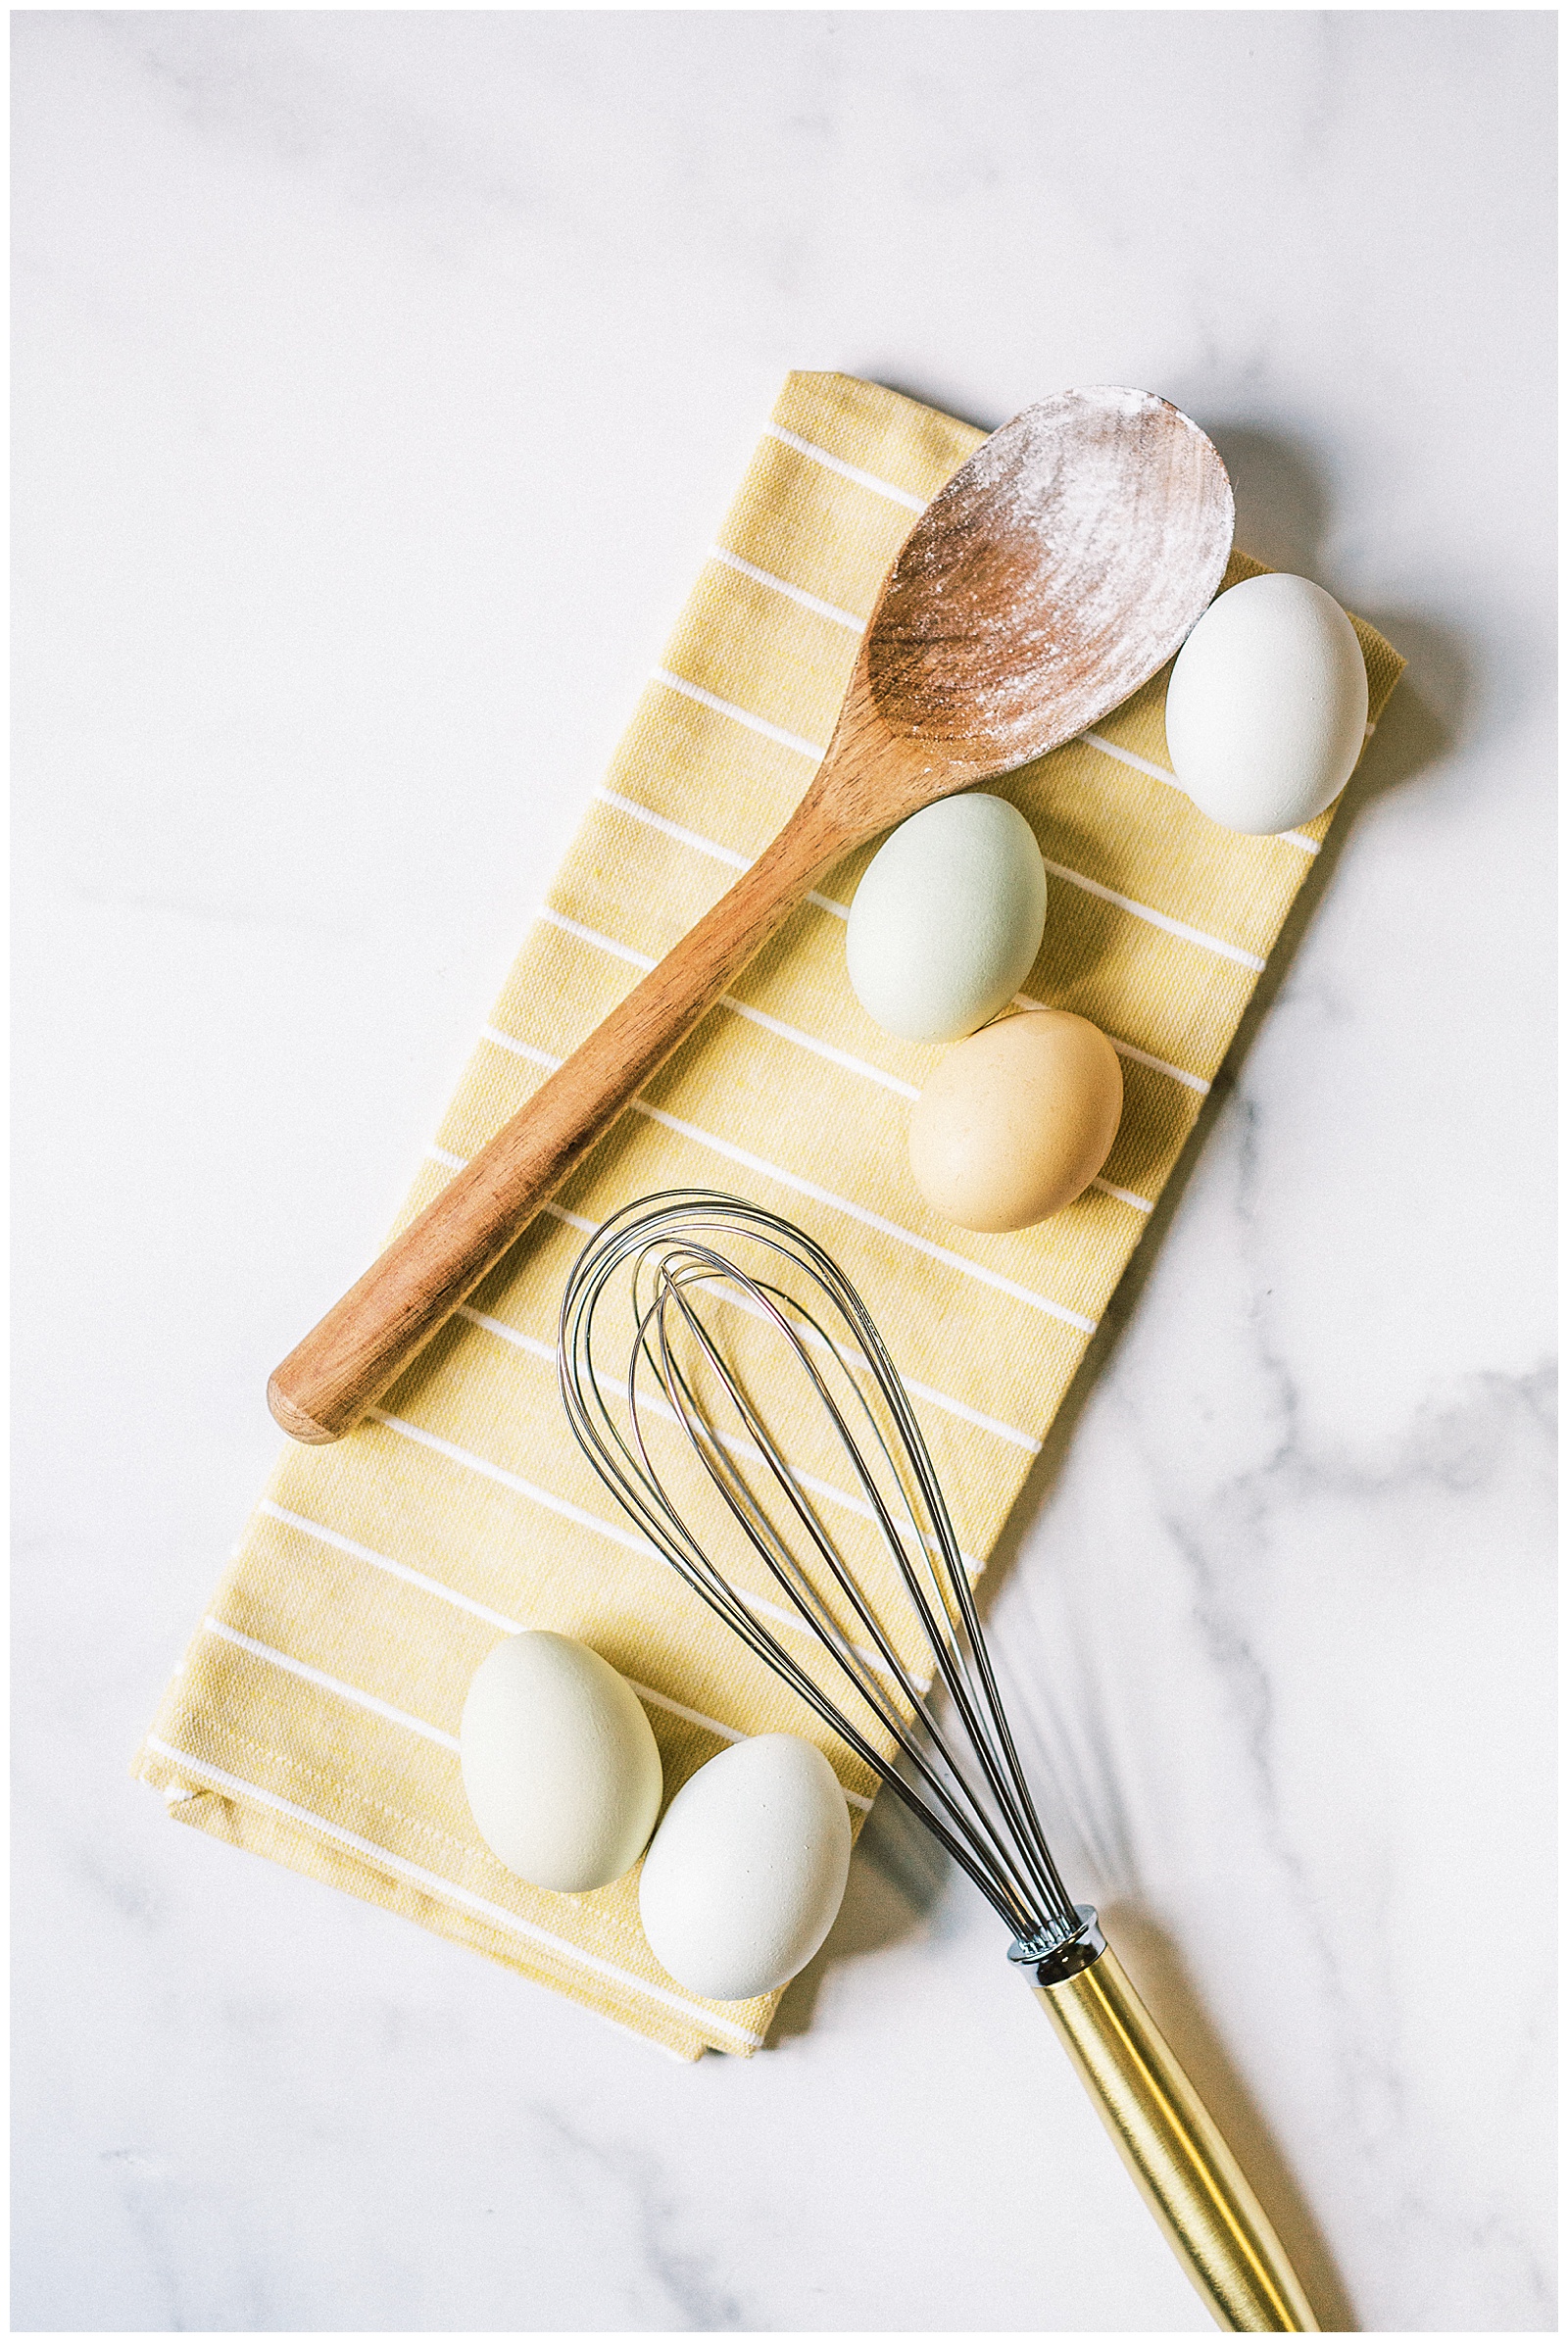 Delish Cakery Brand Photography of Eggs and Kitchen Baking Utensils